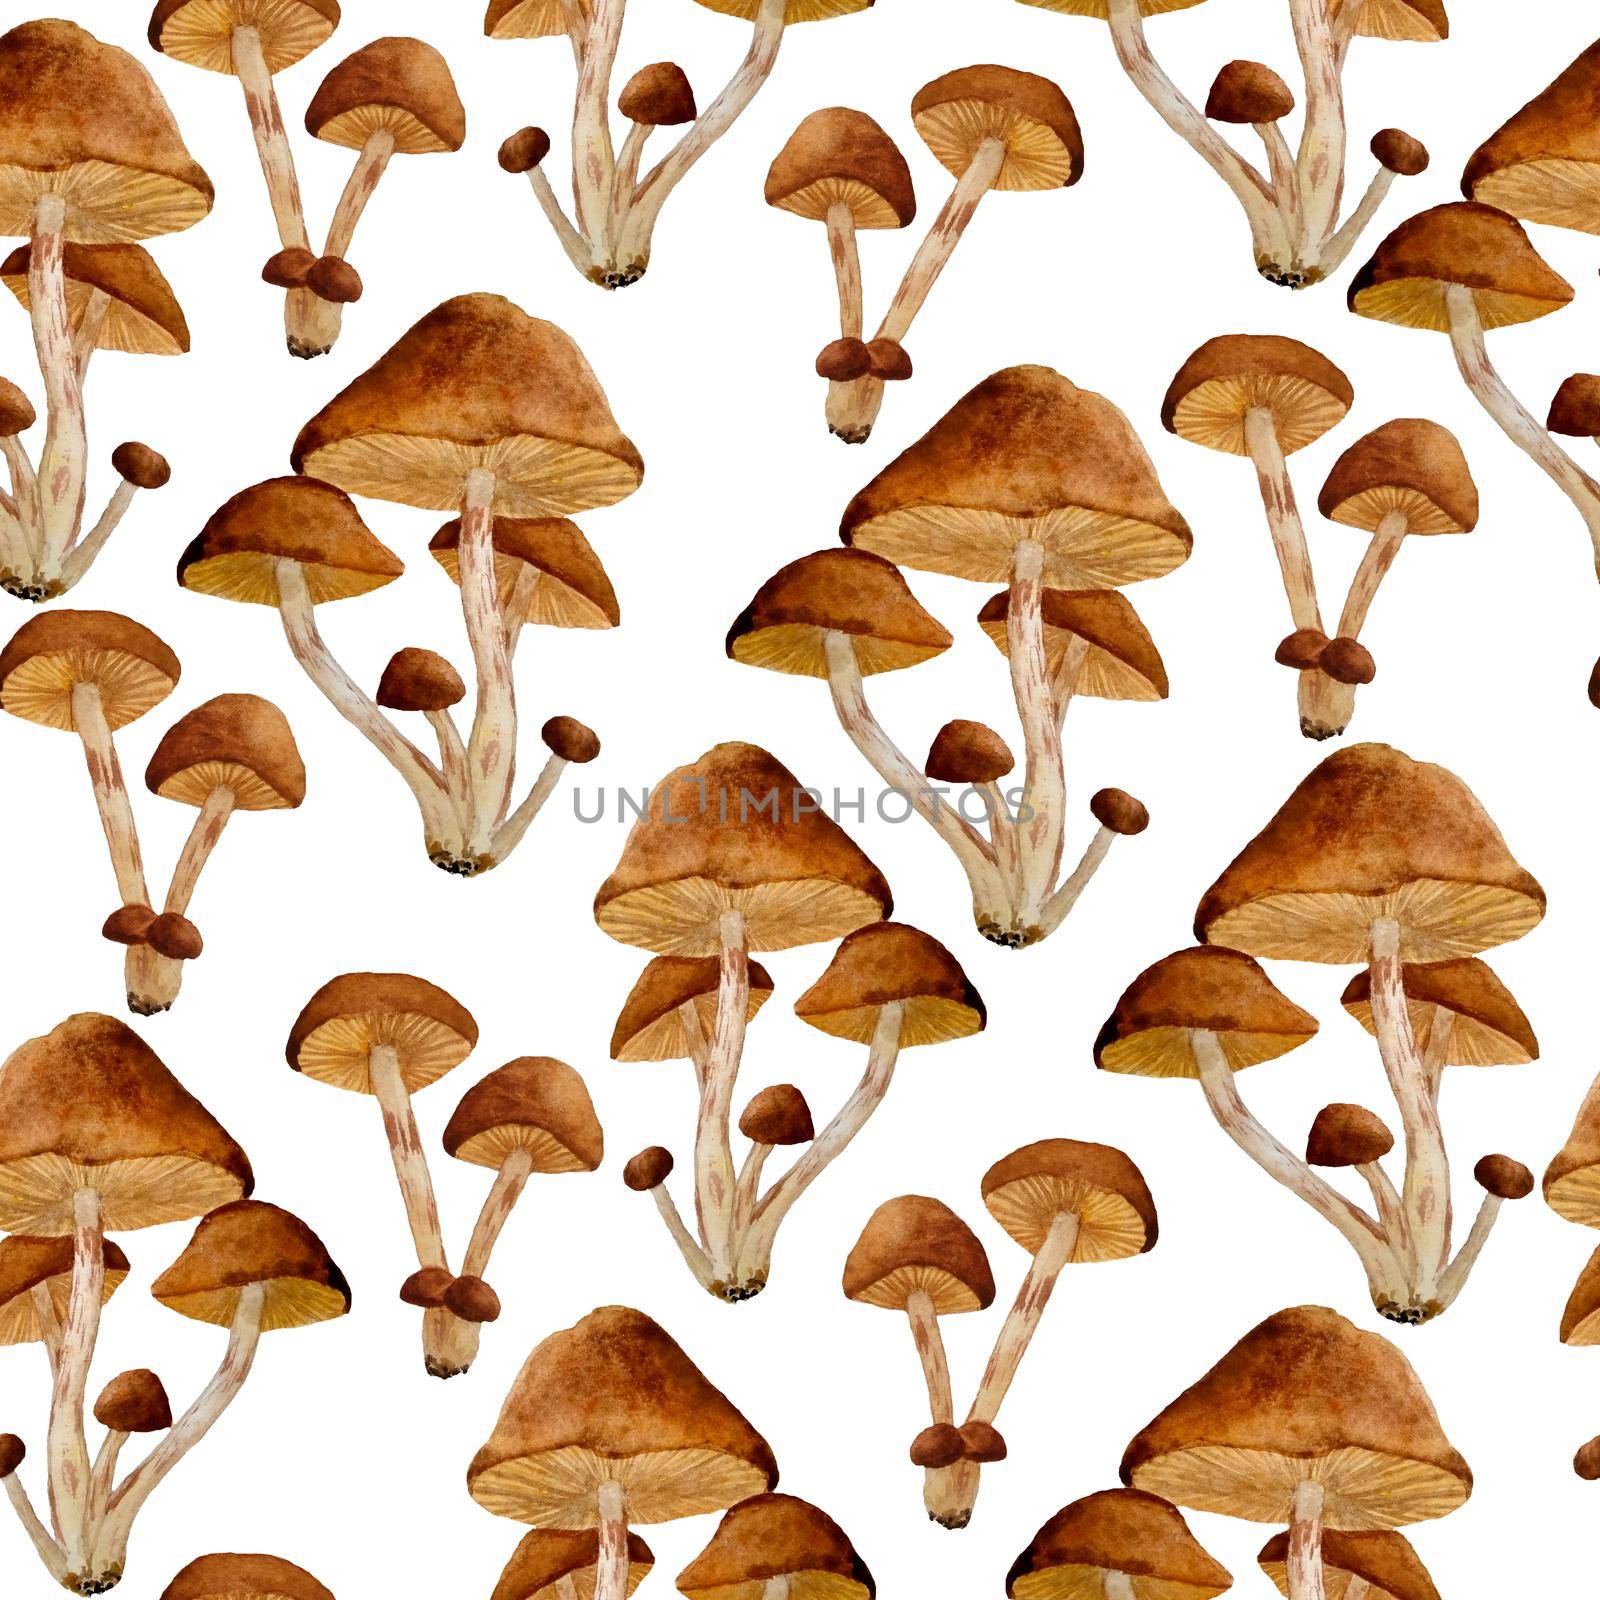 watercolor hand drawn seamless pattern poisonous dangerous mushroom illustration of webcap fungi. Brown ochre caps dark dry leaves in fall autumn forest wood woodland nature Halloween scrapbook design. by Lagmar